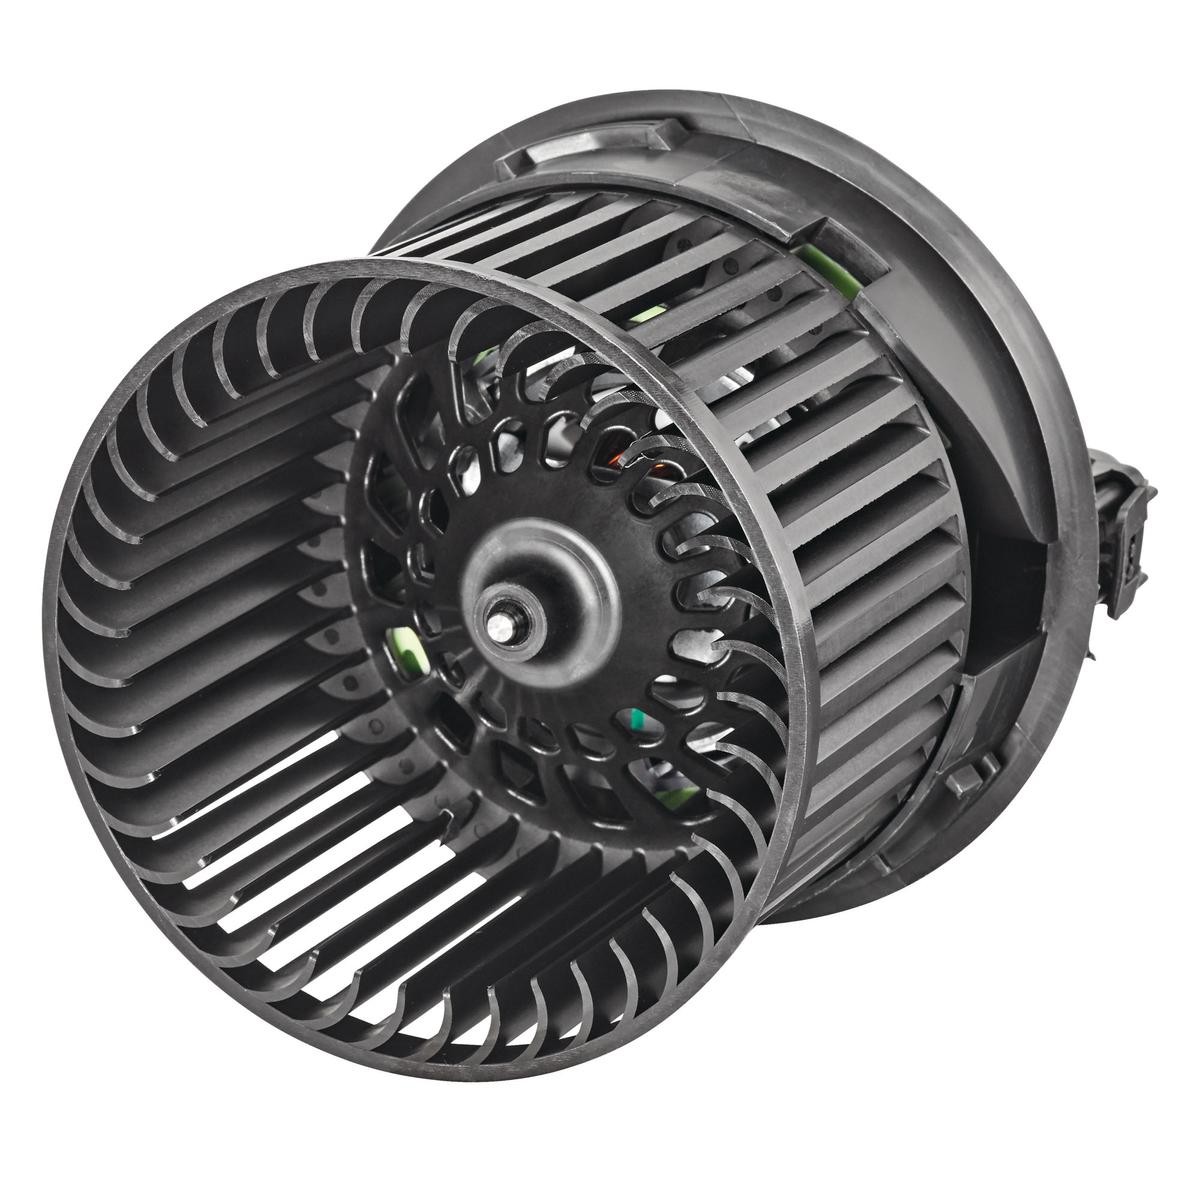 VALEO 715271 Interior Blower PEUGEOT experience and price